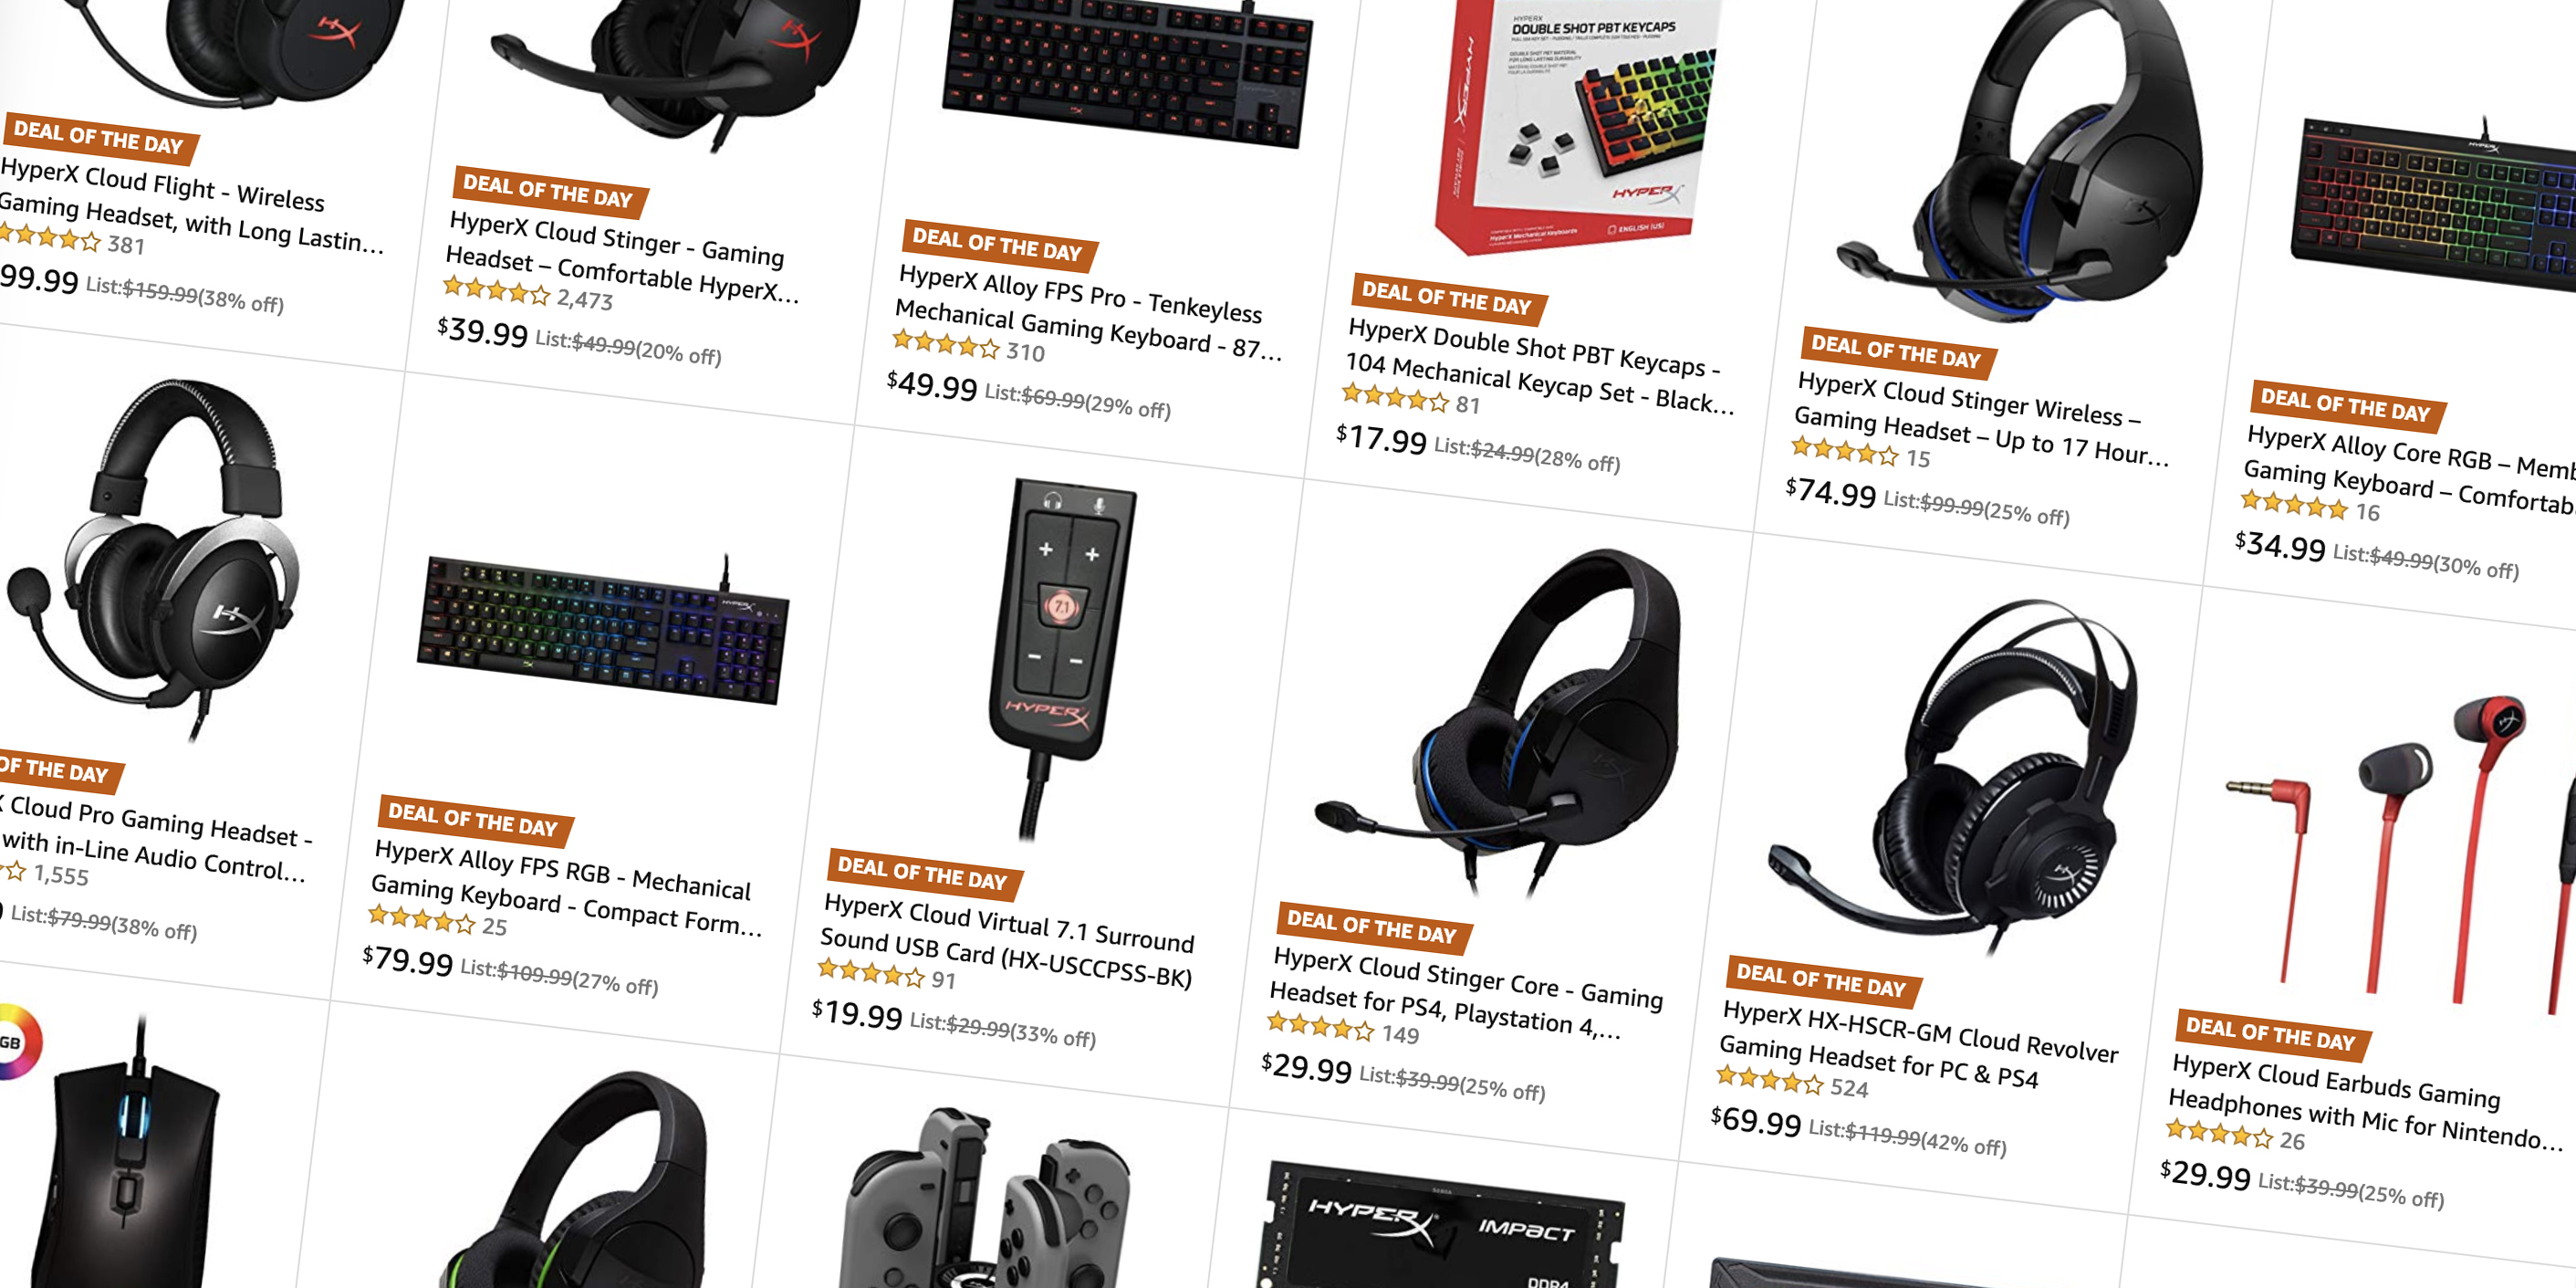 https://9to5toys.com/wp-content/uploads/sites/5/2019/03/hyperx-gaming-deals.jpg